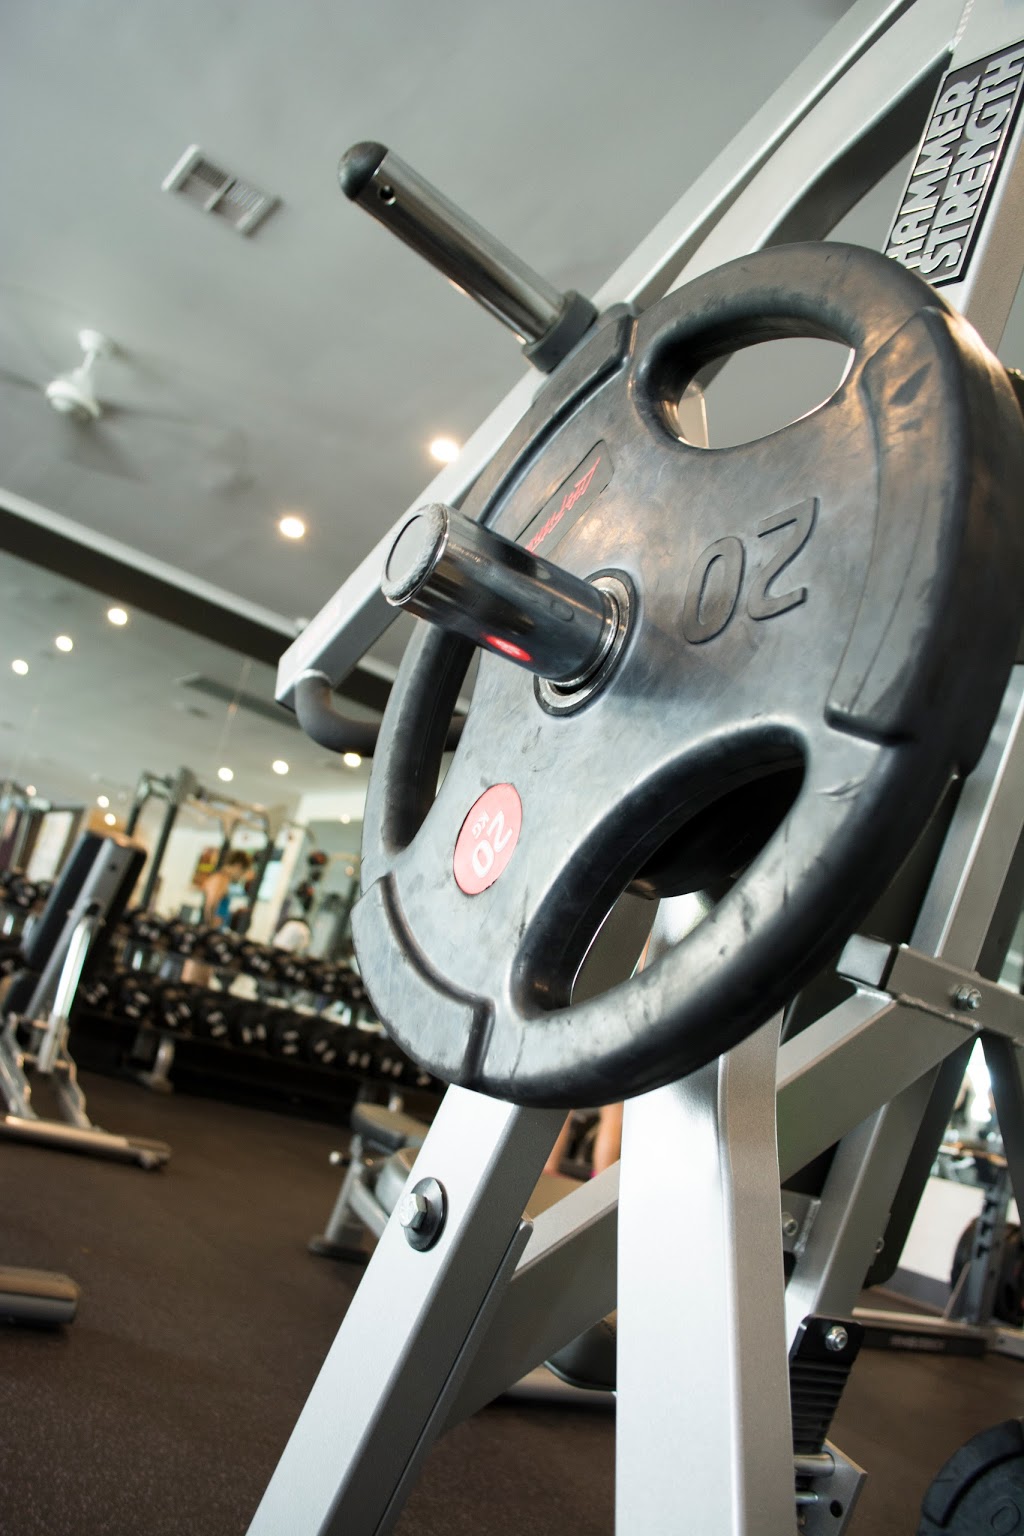 Anytime Fitness | gym | 12 Sidney Nolan St, Conder ACT 2906, Australia | 0262847227 OR +61 2 6284 7227